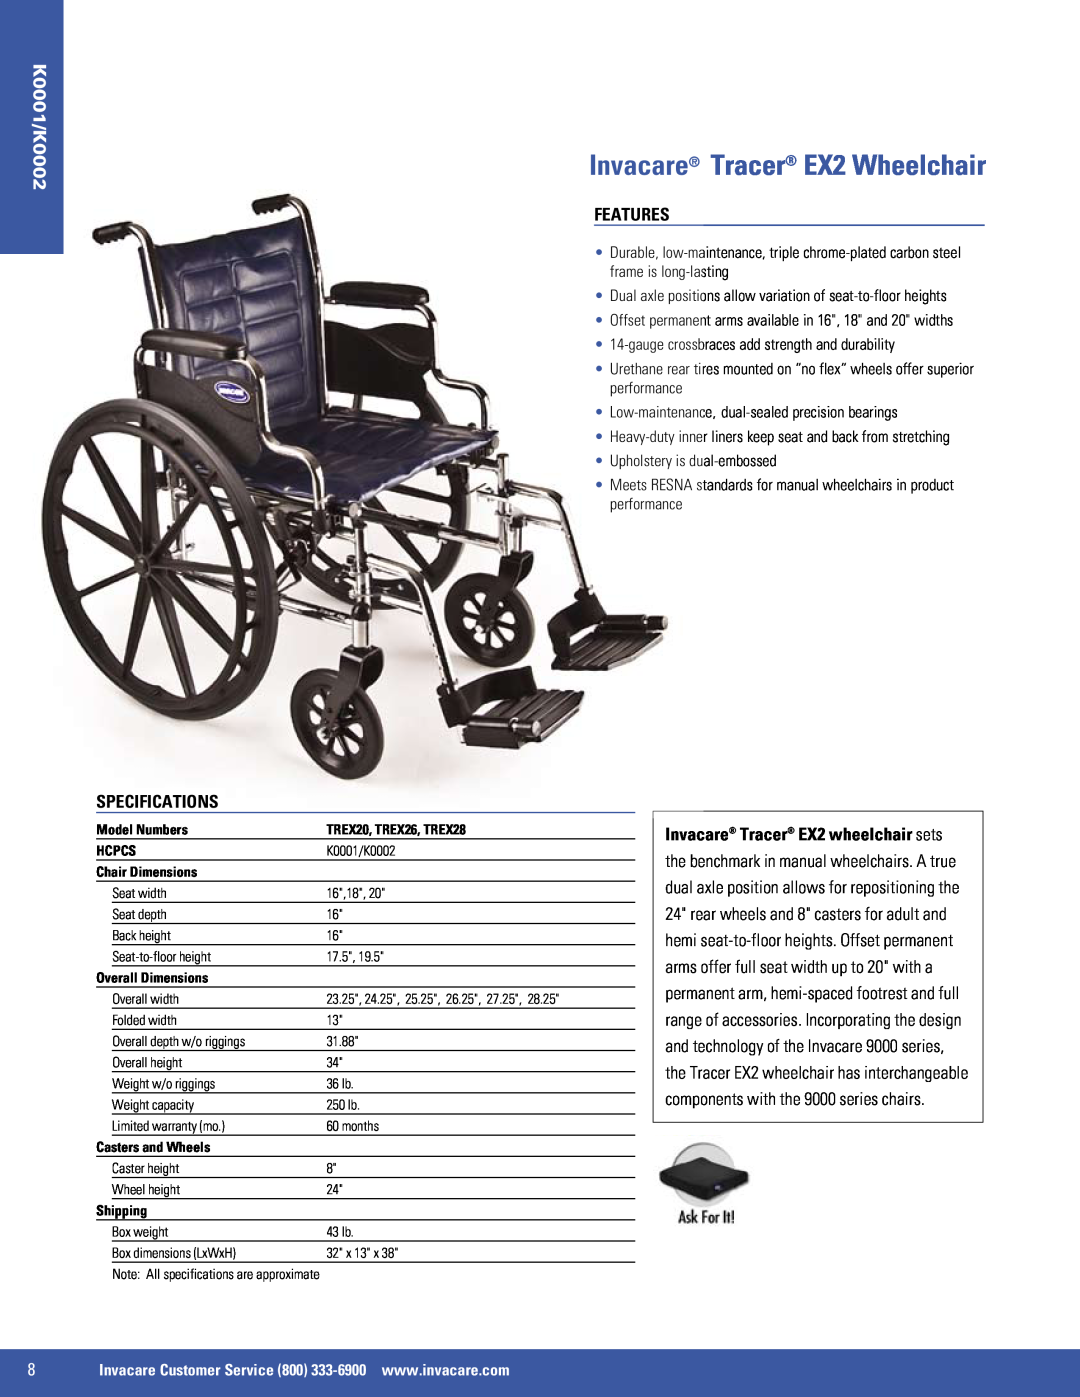 Invacare 9000 XT, 9000 SL, SX5 manual Invacare Tracer EX2 Wheelchair, K0001/K0002, Features, Specifications 